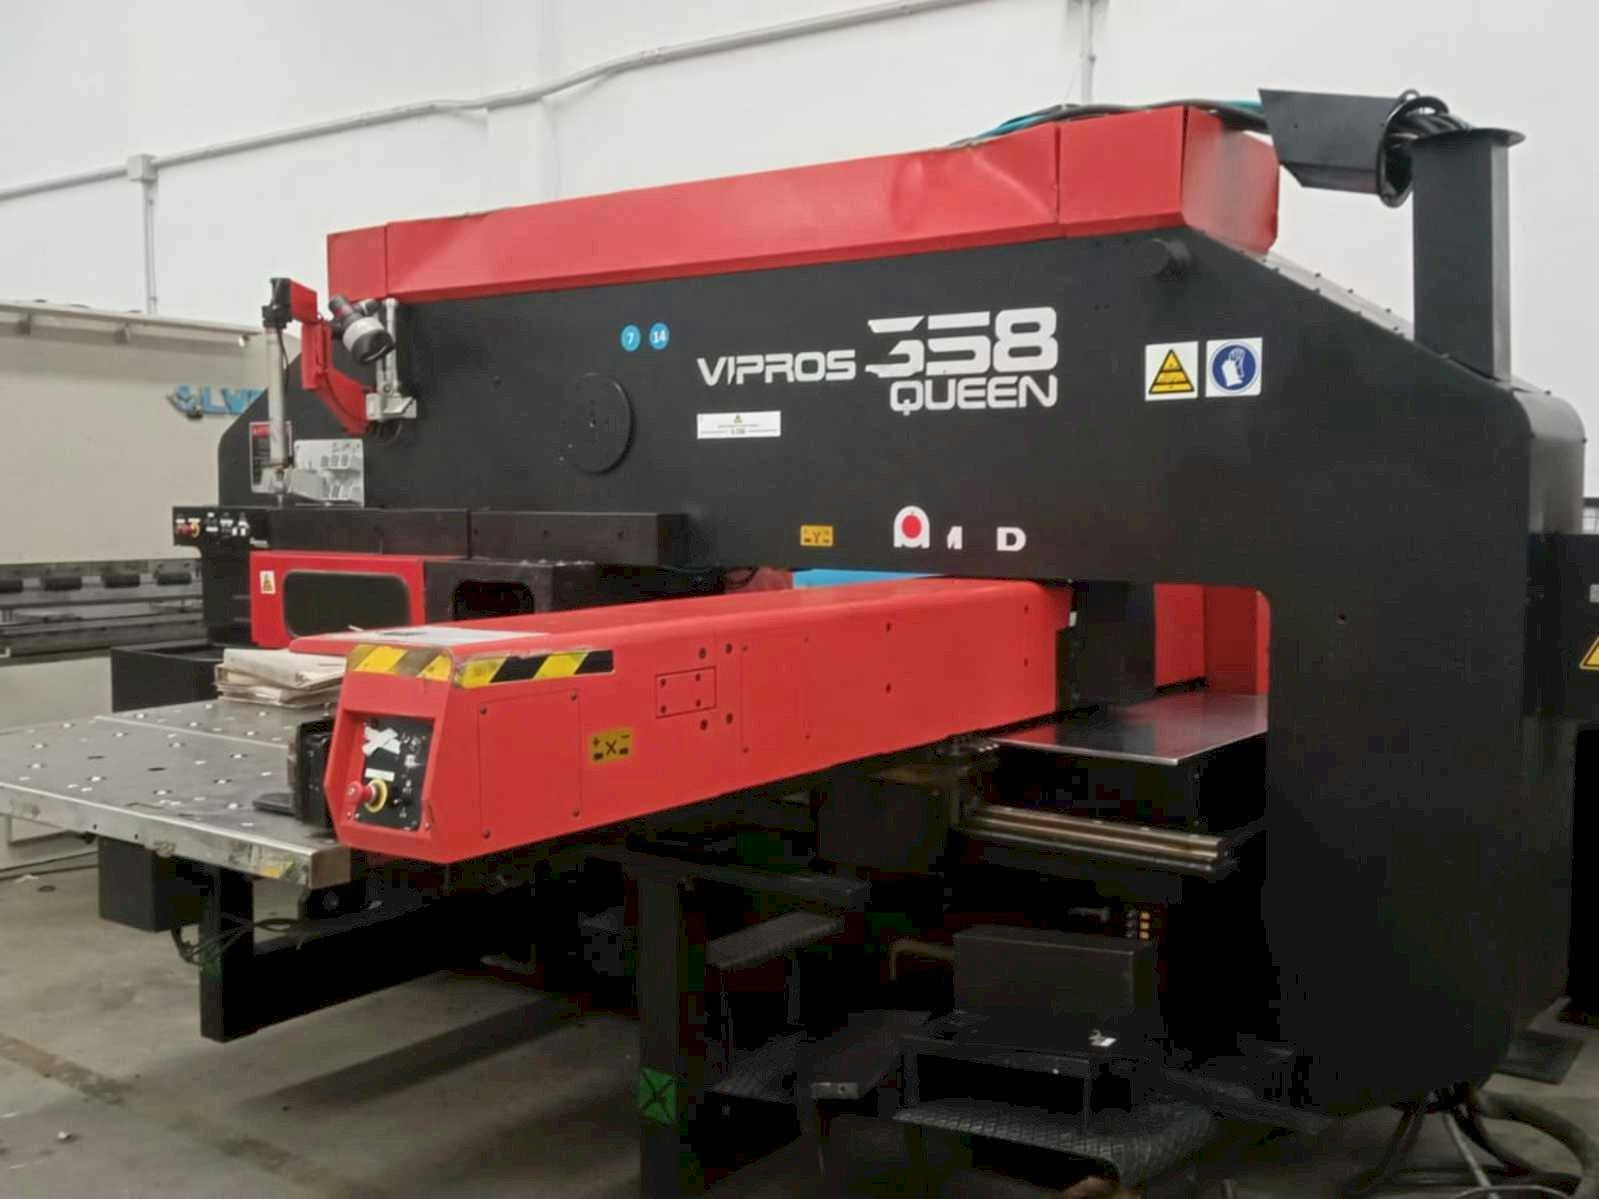 Front view of AMADA Vipros 358 Queen  machine